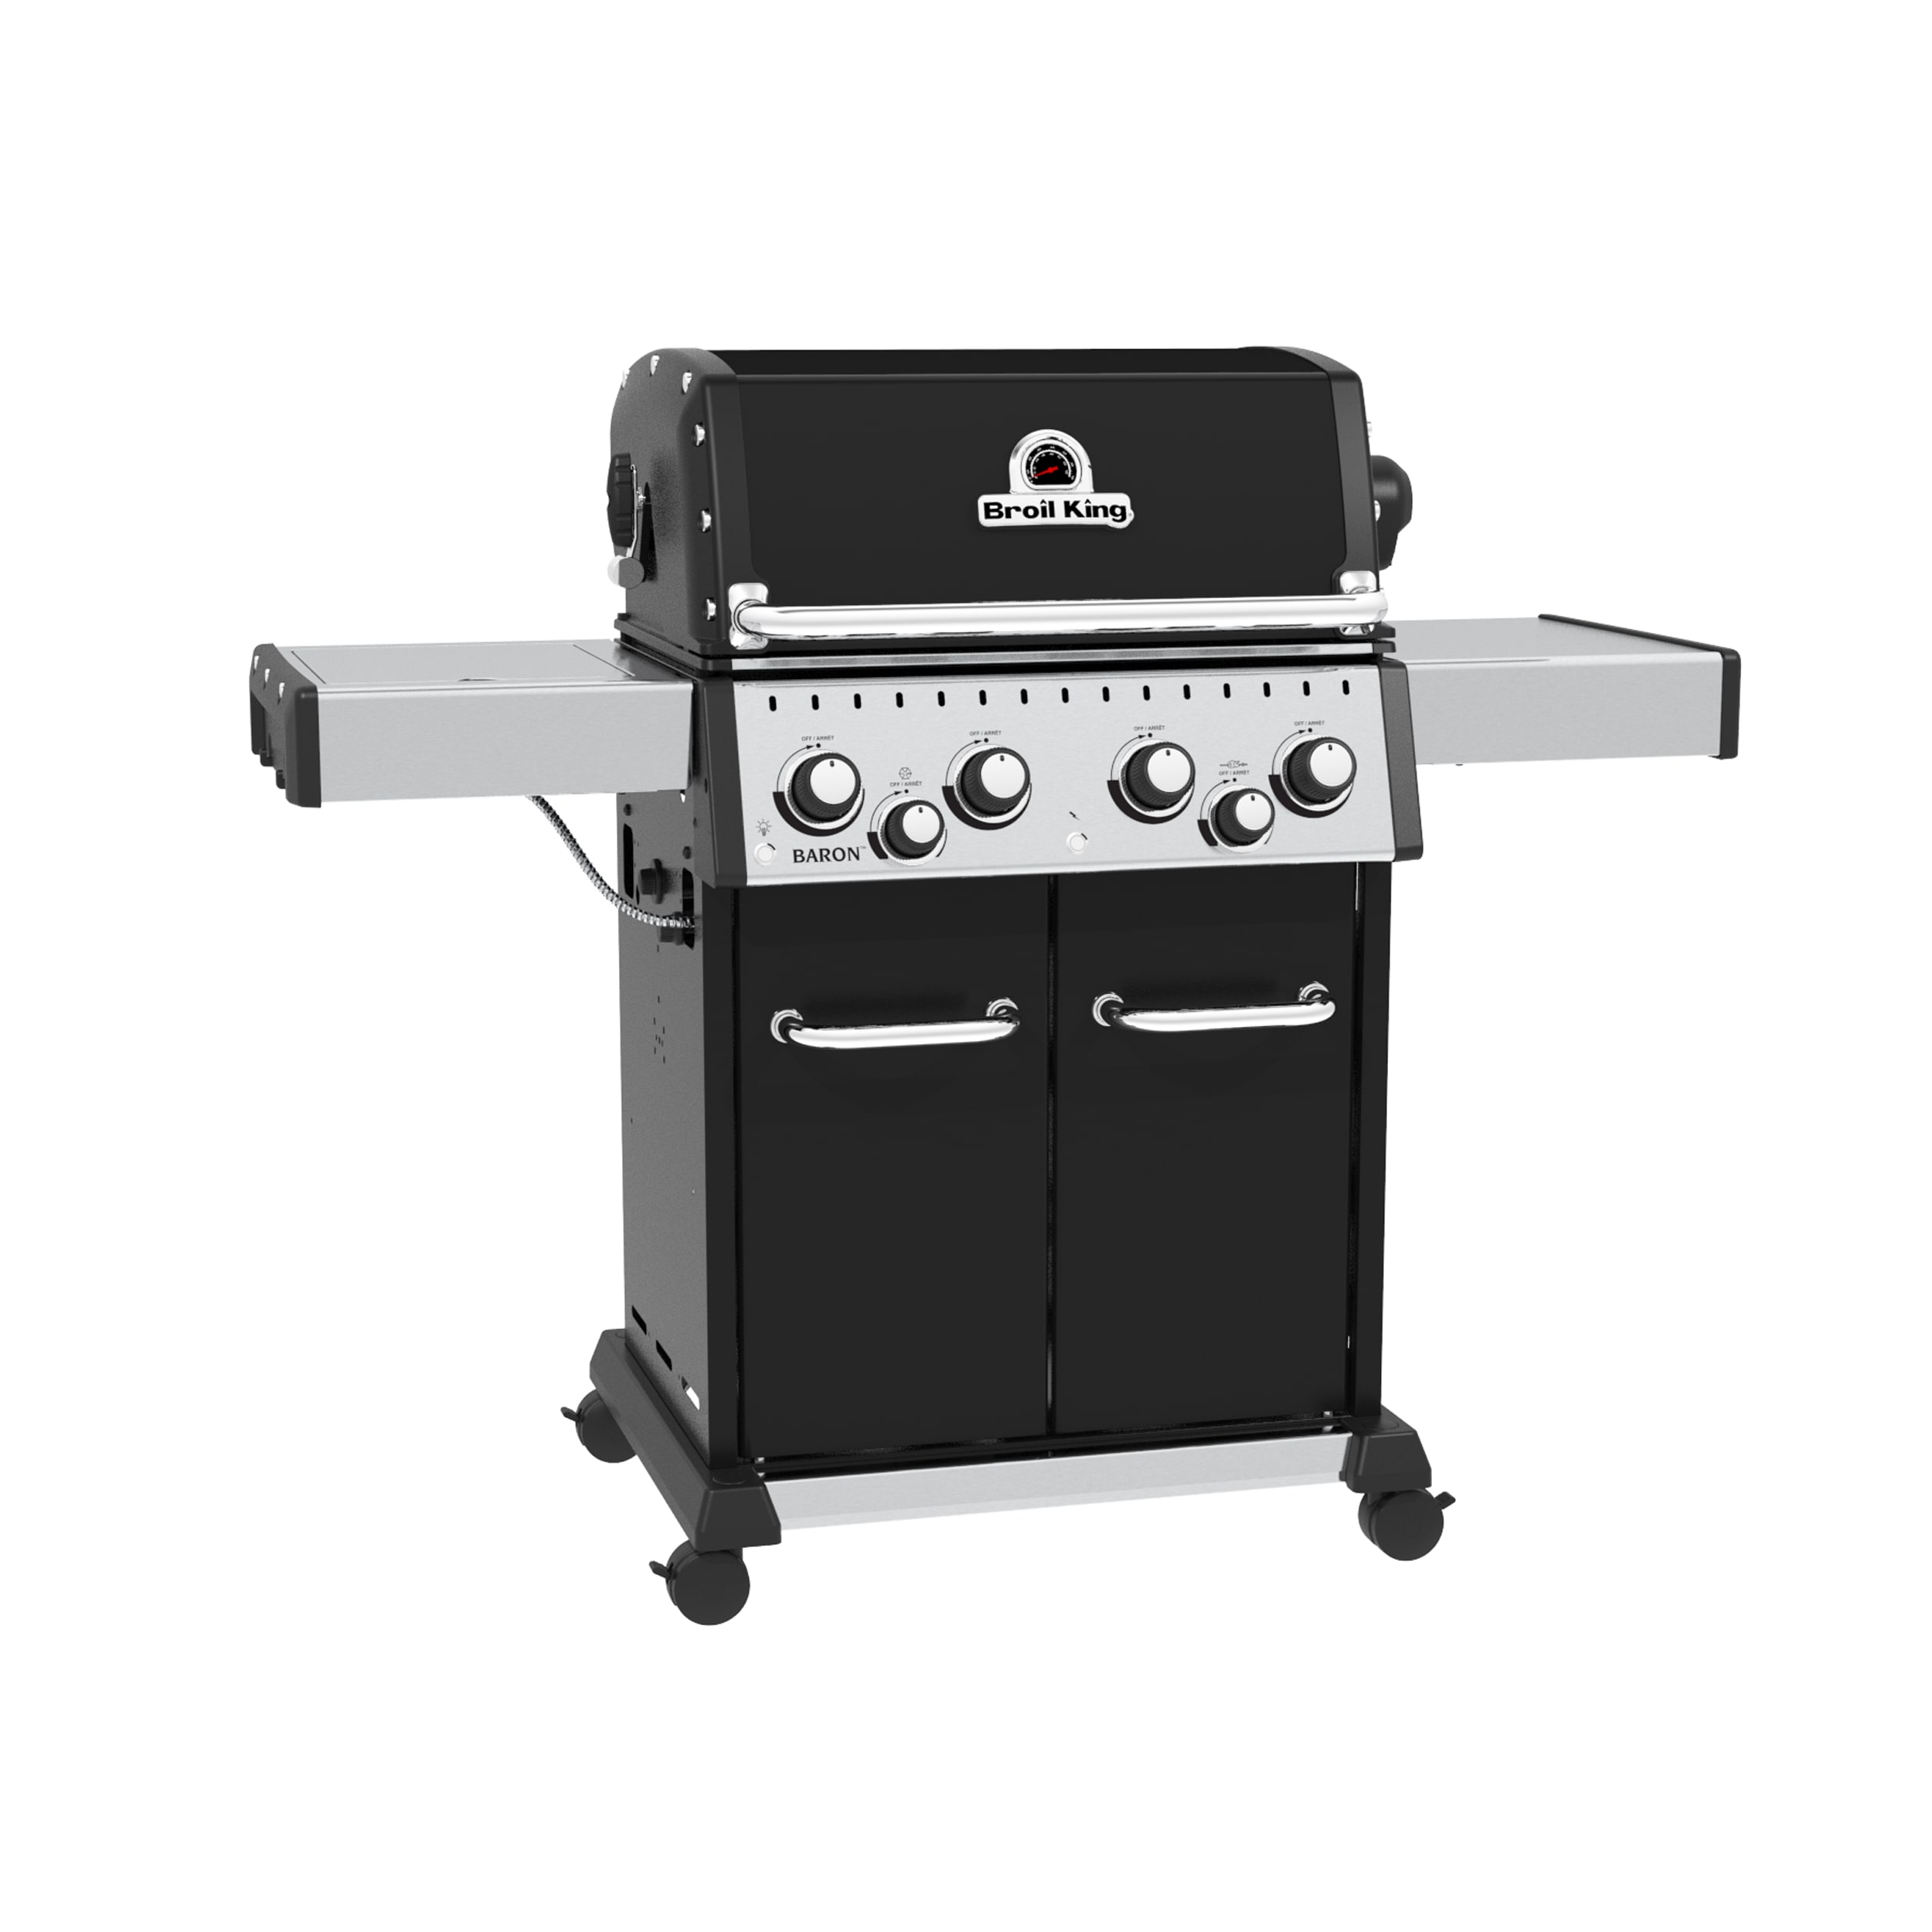 Outlaw krystal Henfald Broil King Baron 490 Pro Black 4-Burner Liquid Propane Gas Grill with 1  Side Burner in the Gas Grills department at Lowes.com